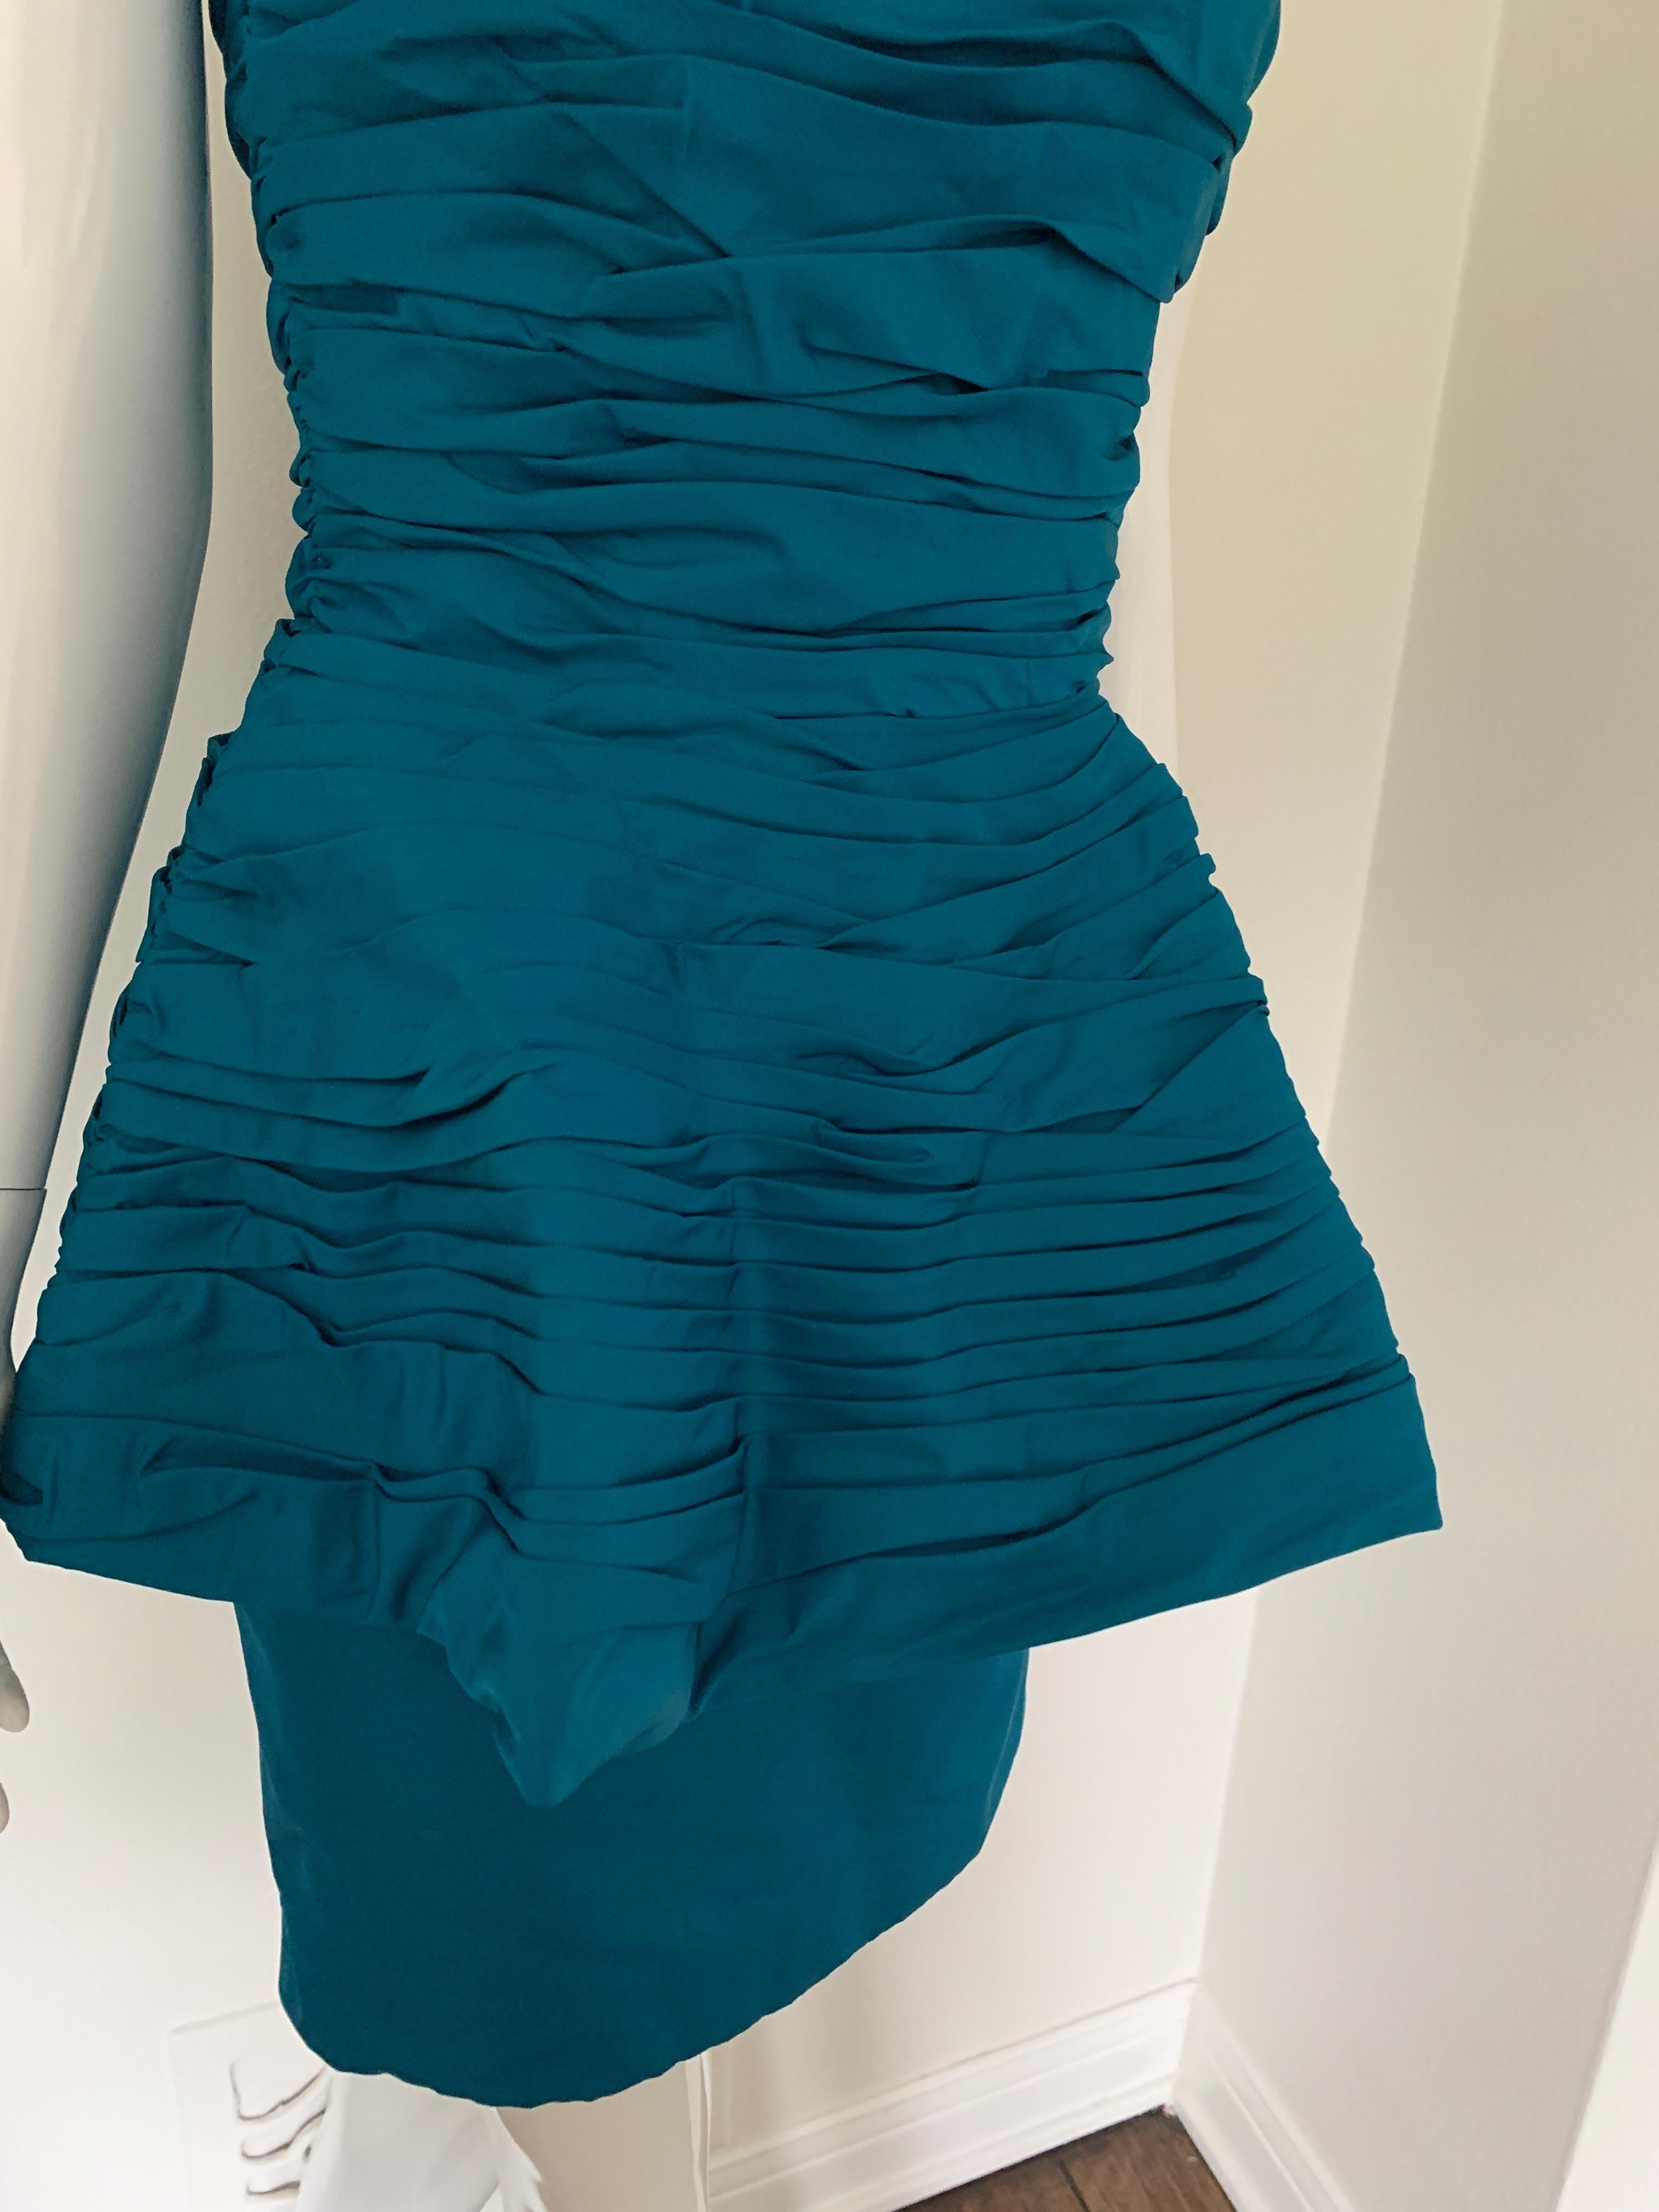 The Ultimate Victor Costa 80s/90s party dress. 
Strapless with ruching, double-layered skirt. 
Knee-length, button, and zipper in the back. Teal in color, great condition for a vintage piece. No size listed - but appears to be a US size 0/2. 